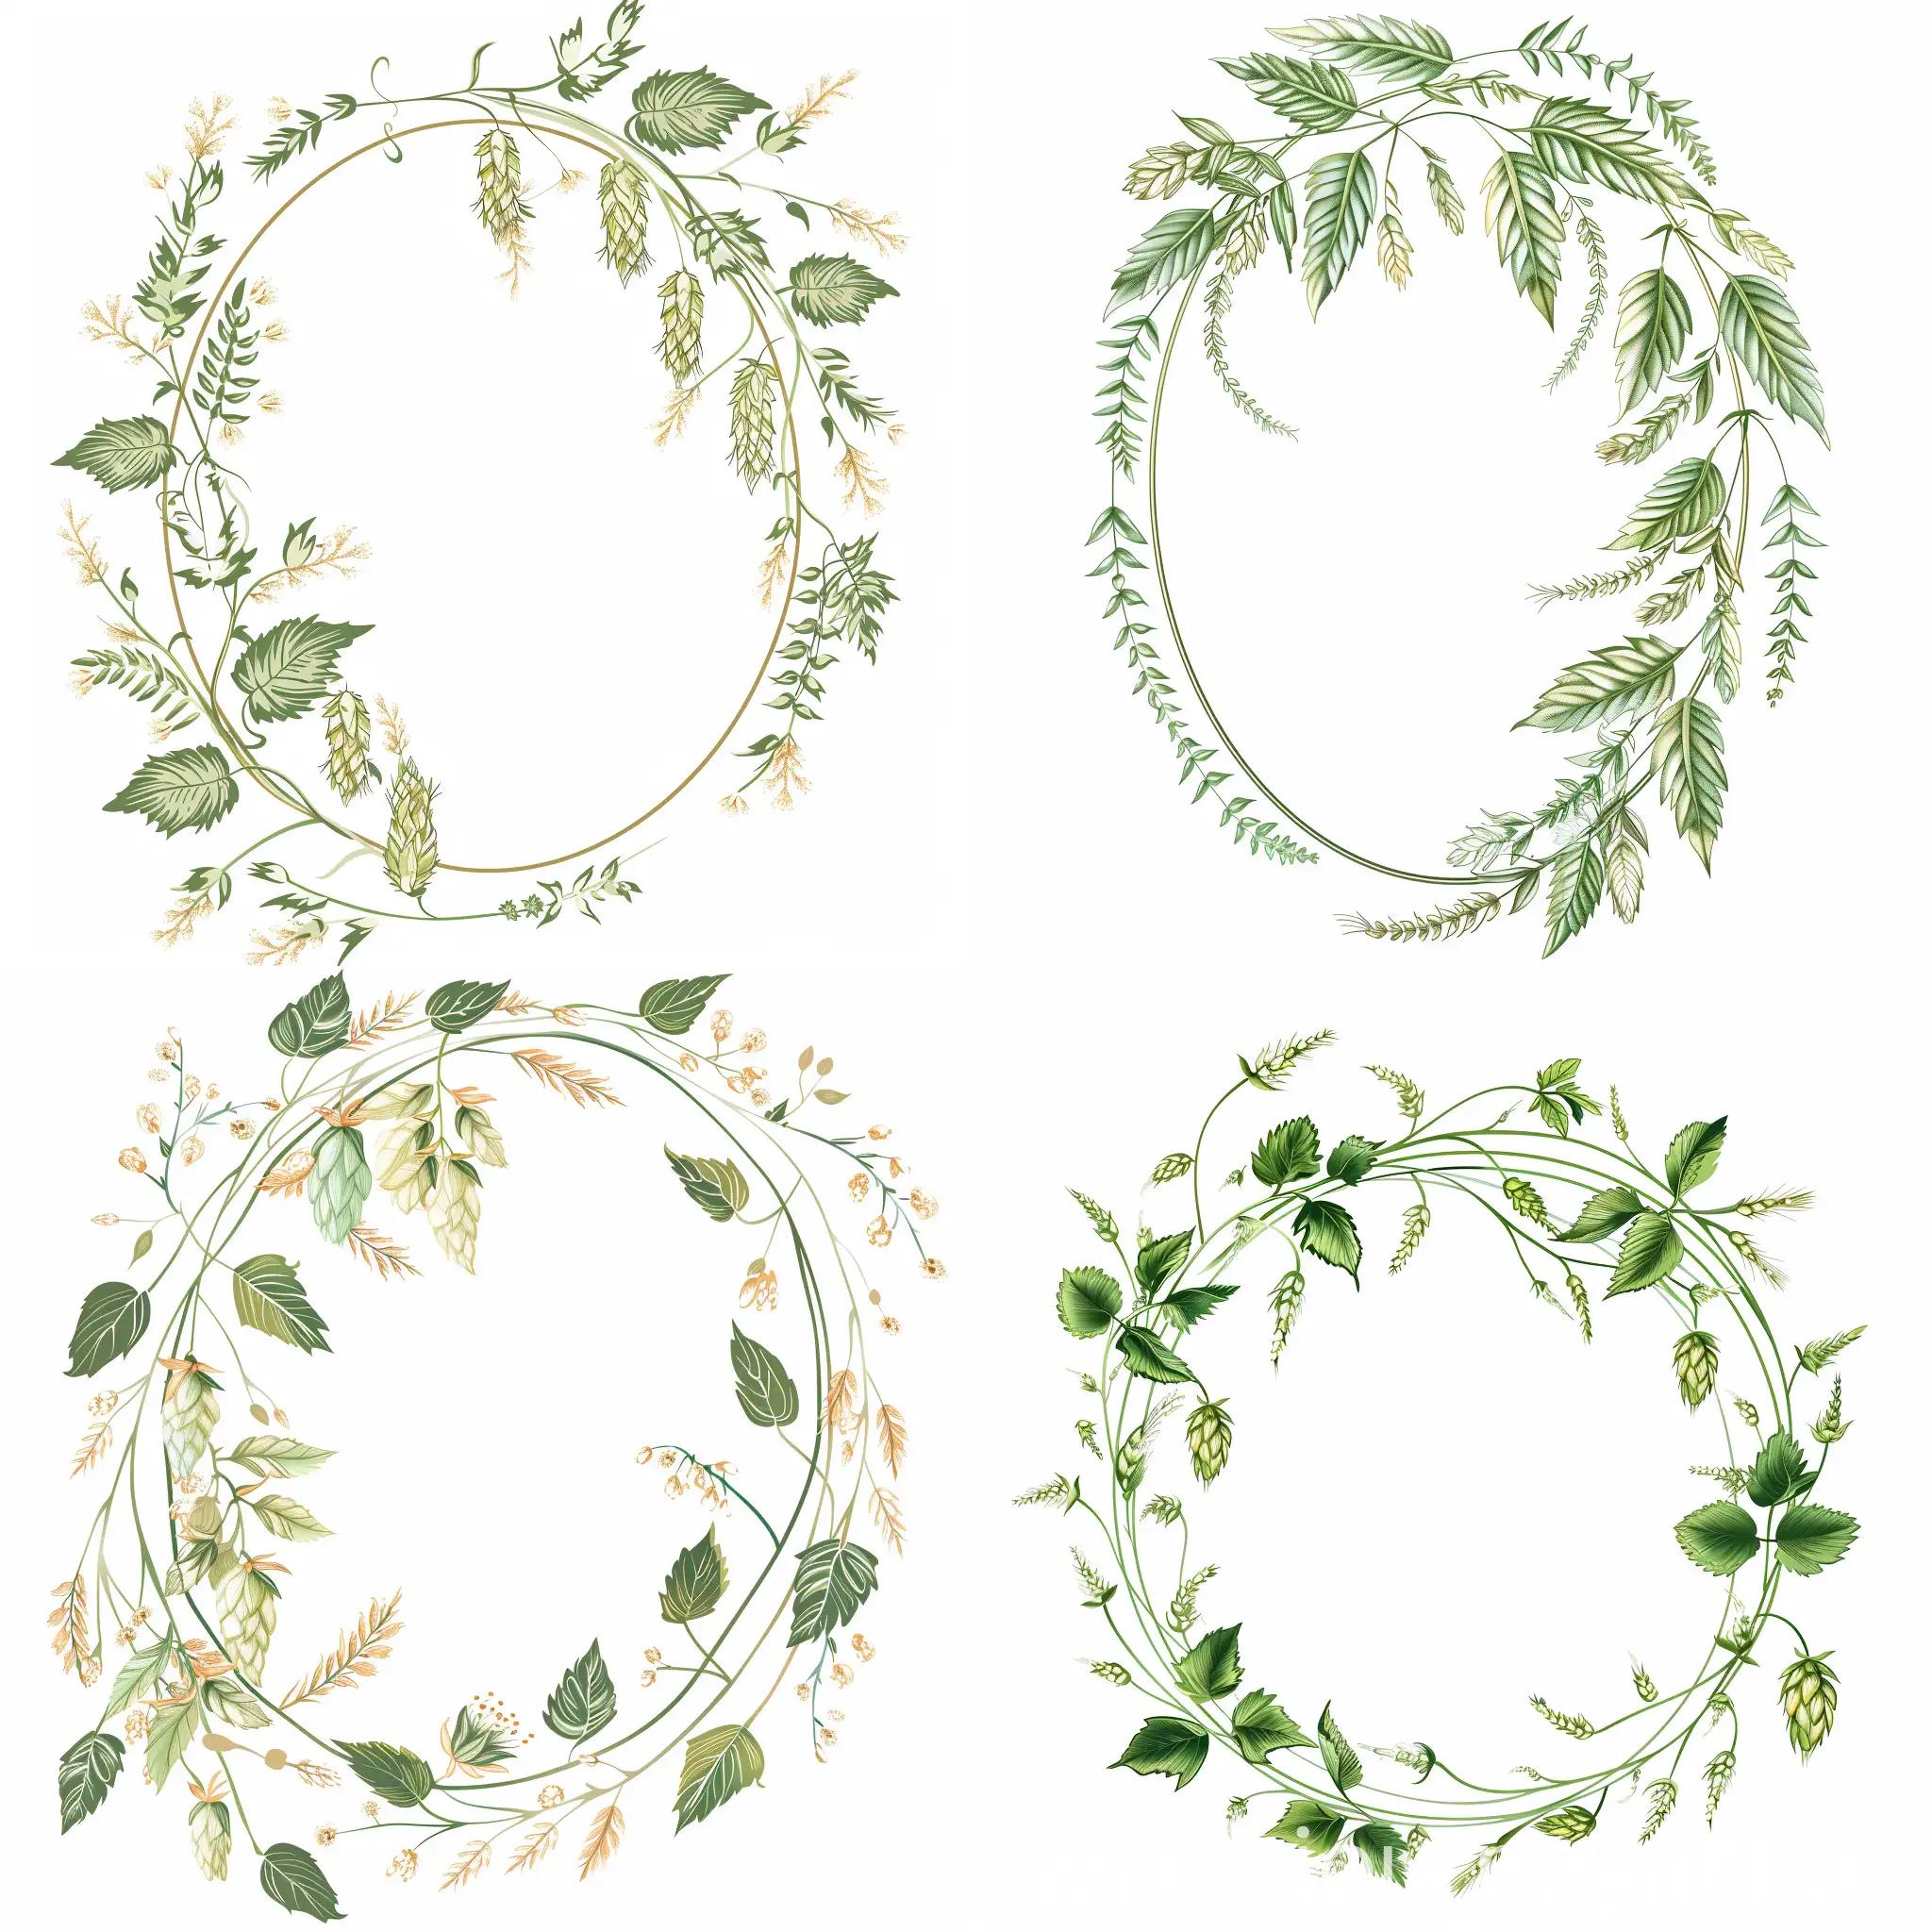 Elegant-VictorianStyle-Oval-Ornament-with-Translucent-Hop-Leaves-and-Barley-Spikelets-on-White-Background